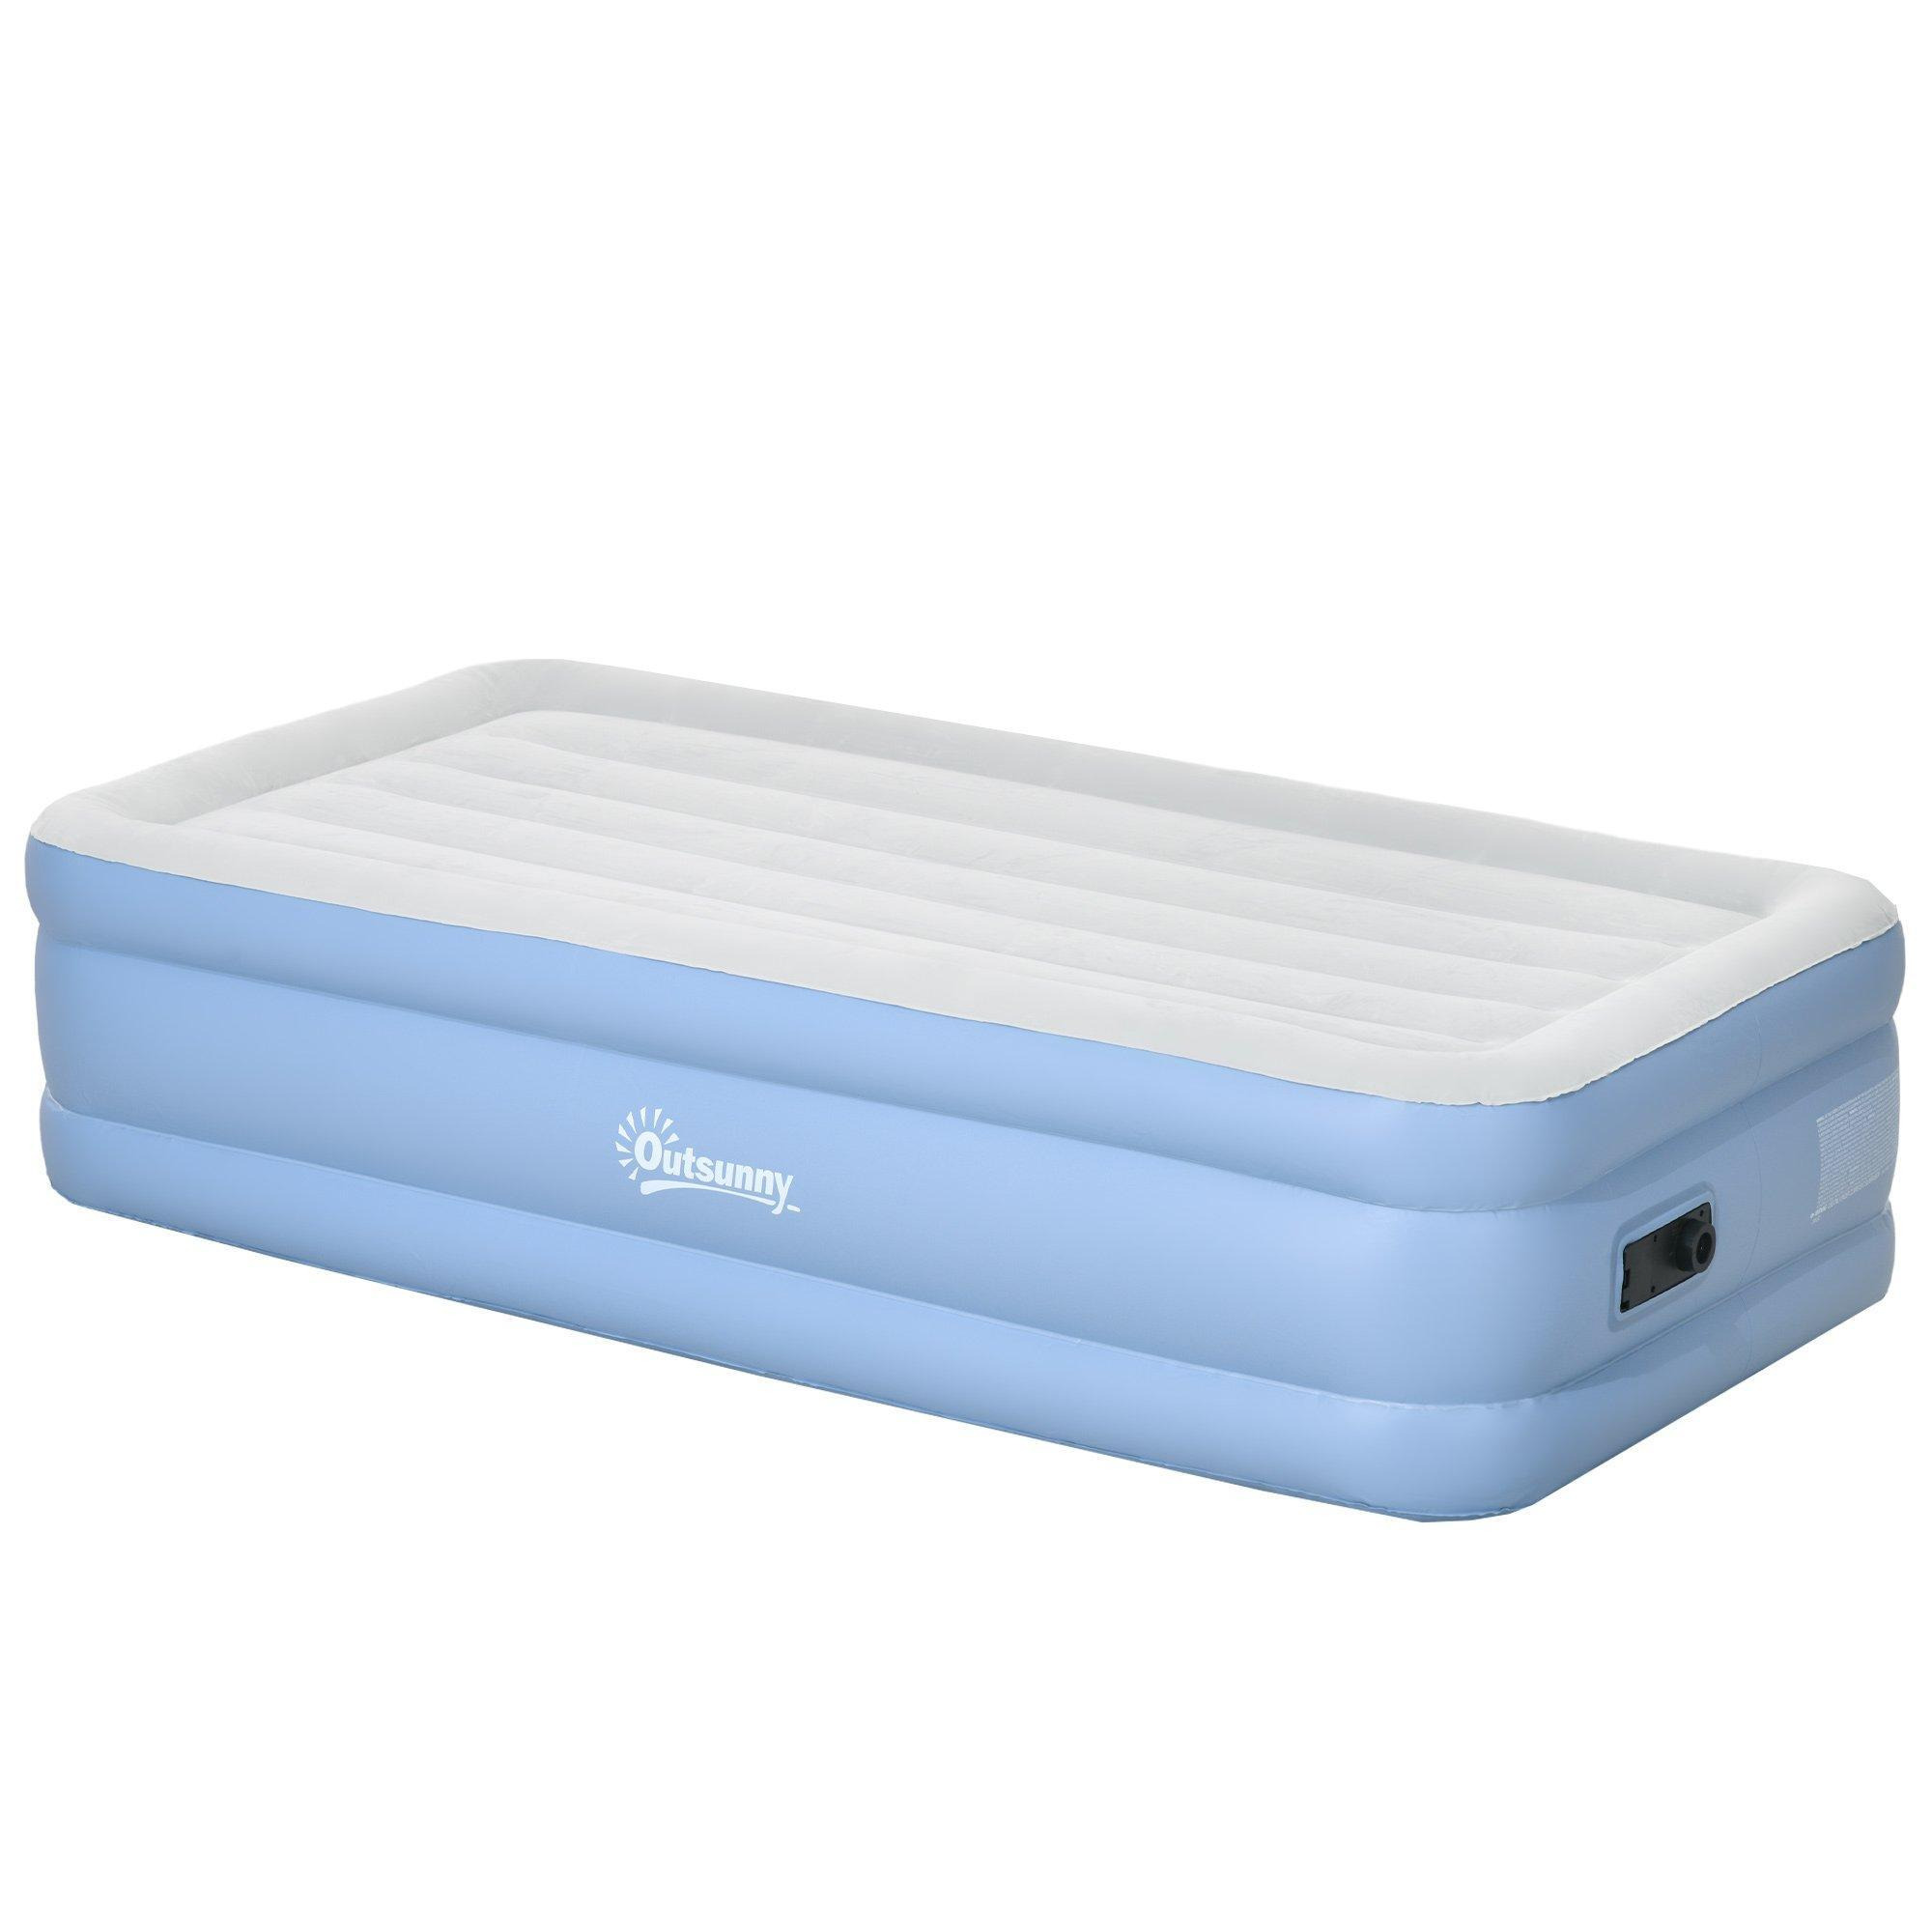 Single Air Bed with Built-in Pump, Inflatable Mattress, 191 x 99 x 46cm - image 1